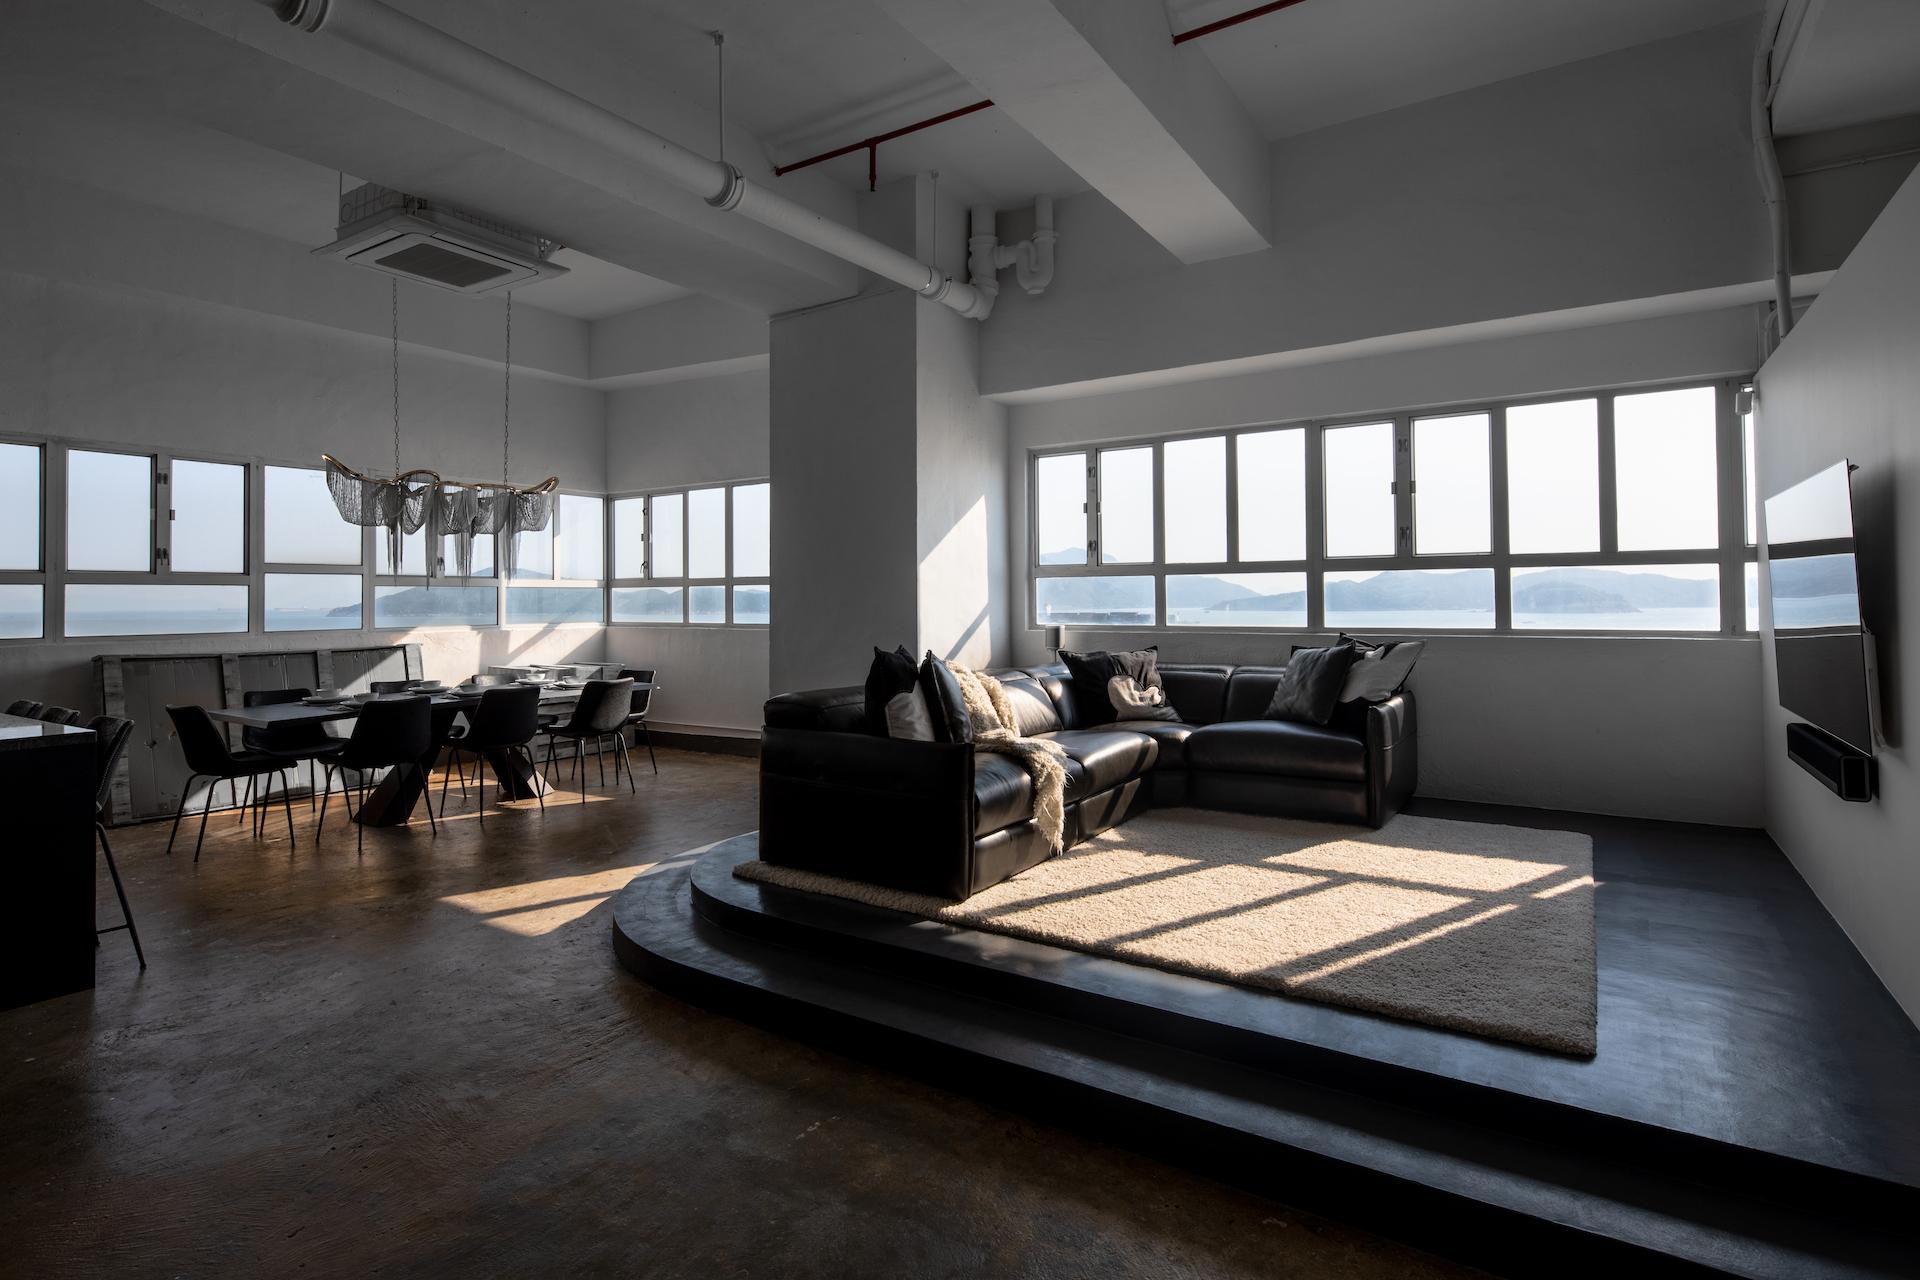 The Transformation of a Pok Fu Lam Industrial Building Flat into a Stylish Office-Cum-Residence